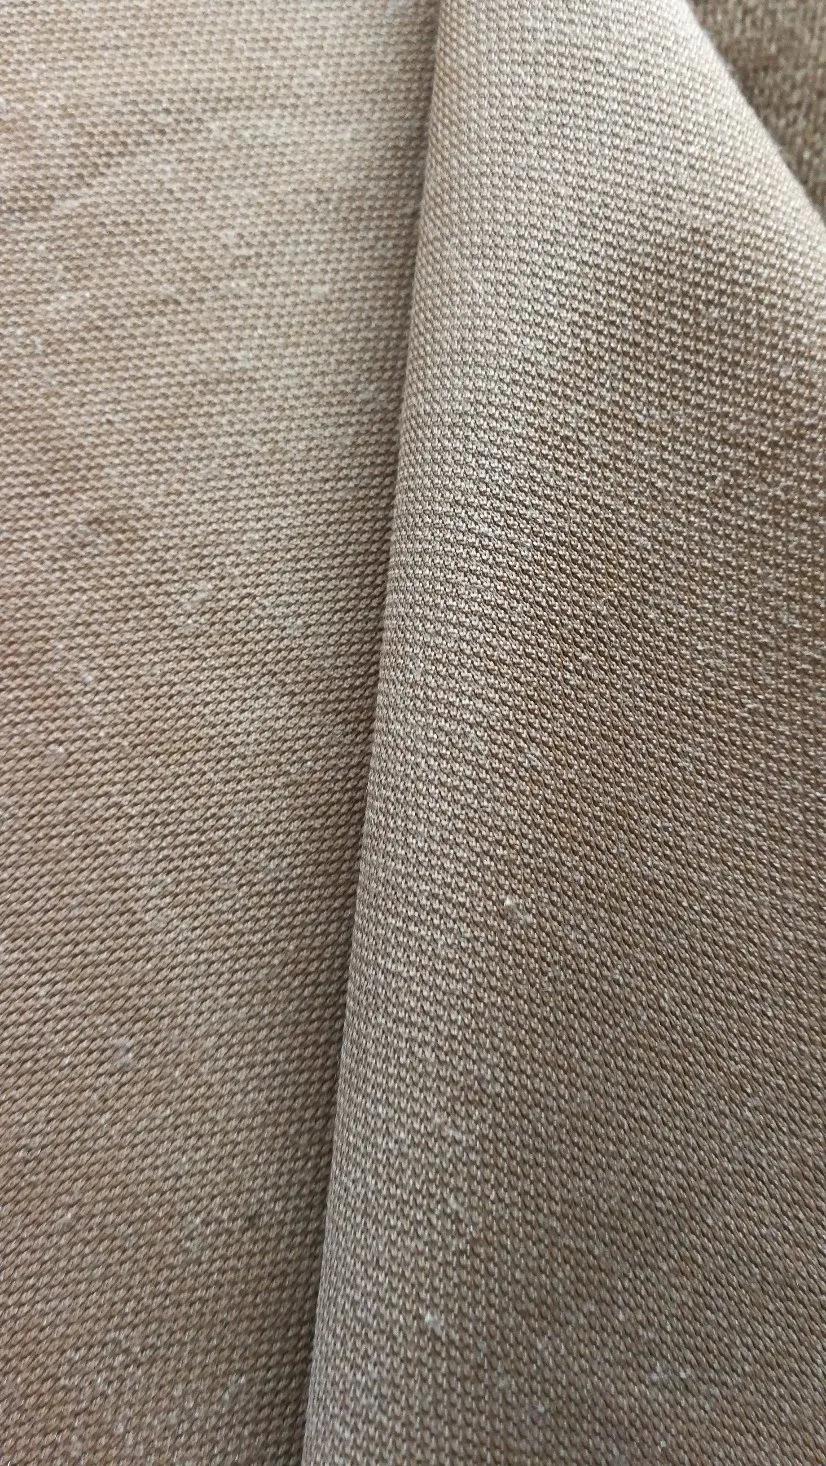 100%Polyester Shiny High Quality Velvet as Sofa Fabric and Curtain Fabric